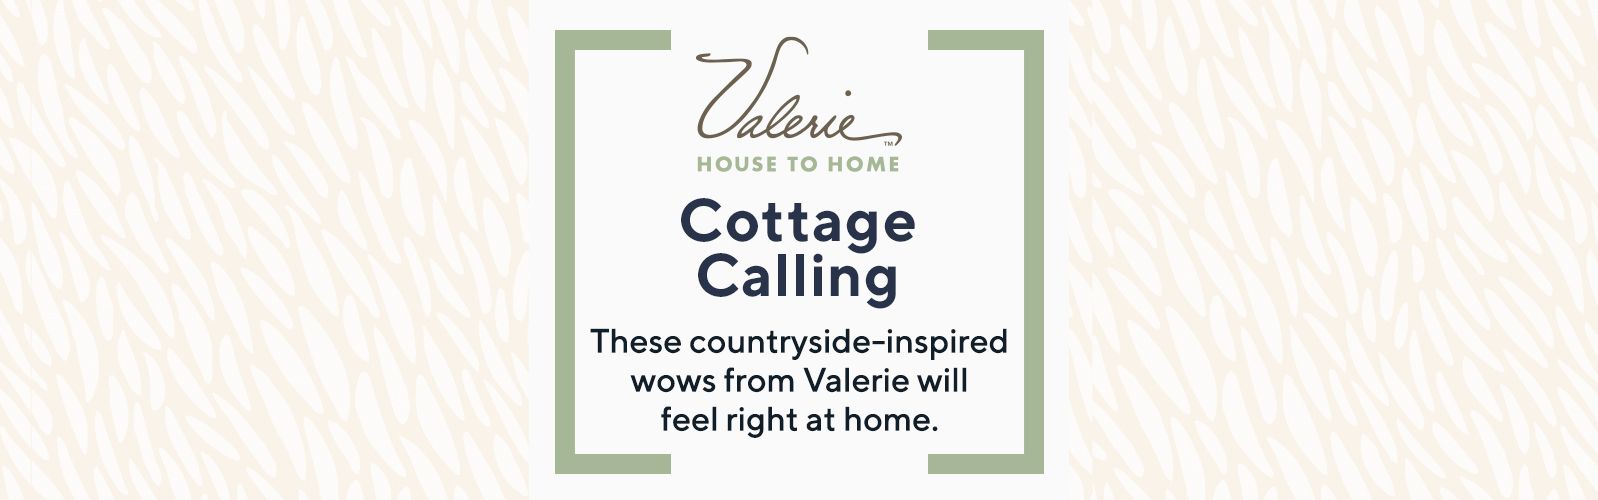 Valerie Parr Hill. Cottage Calling: These countryside-inspired wows from Valerie will feel right at home.